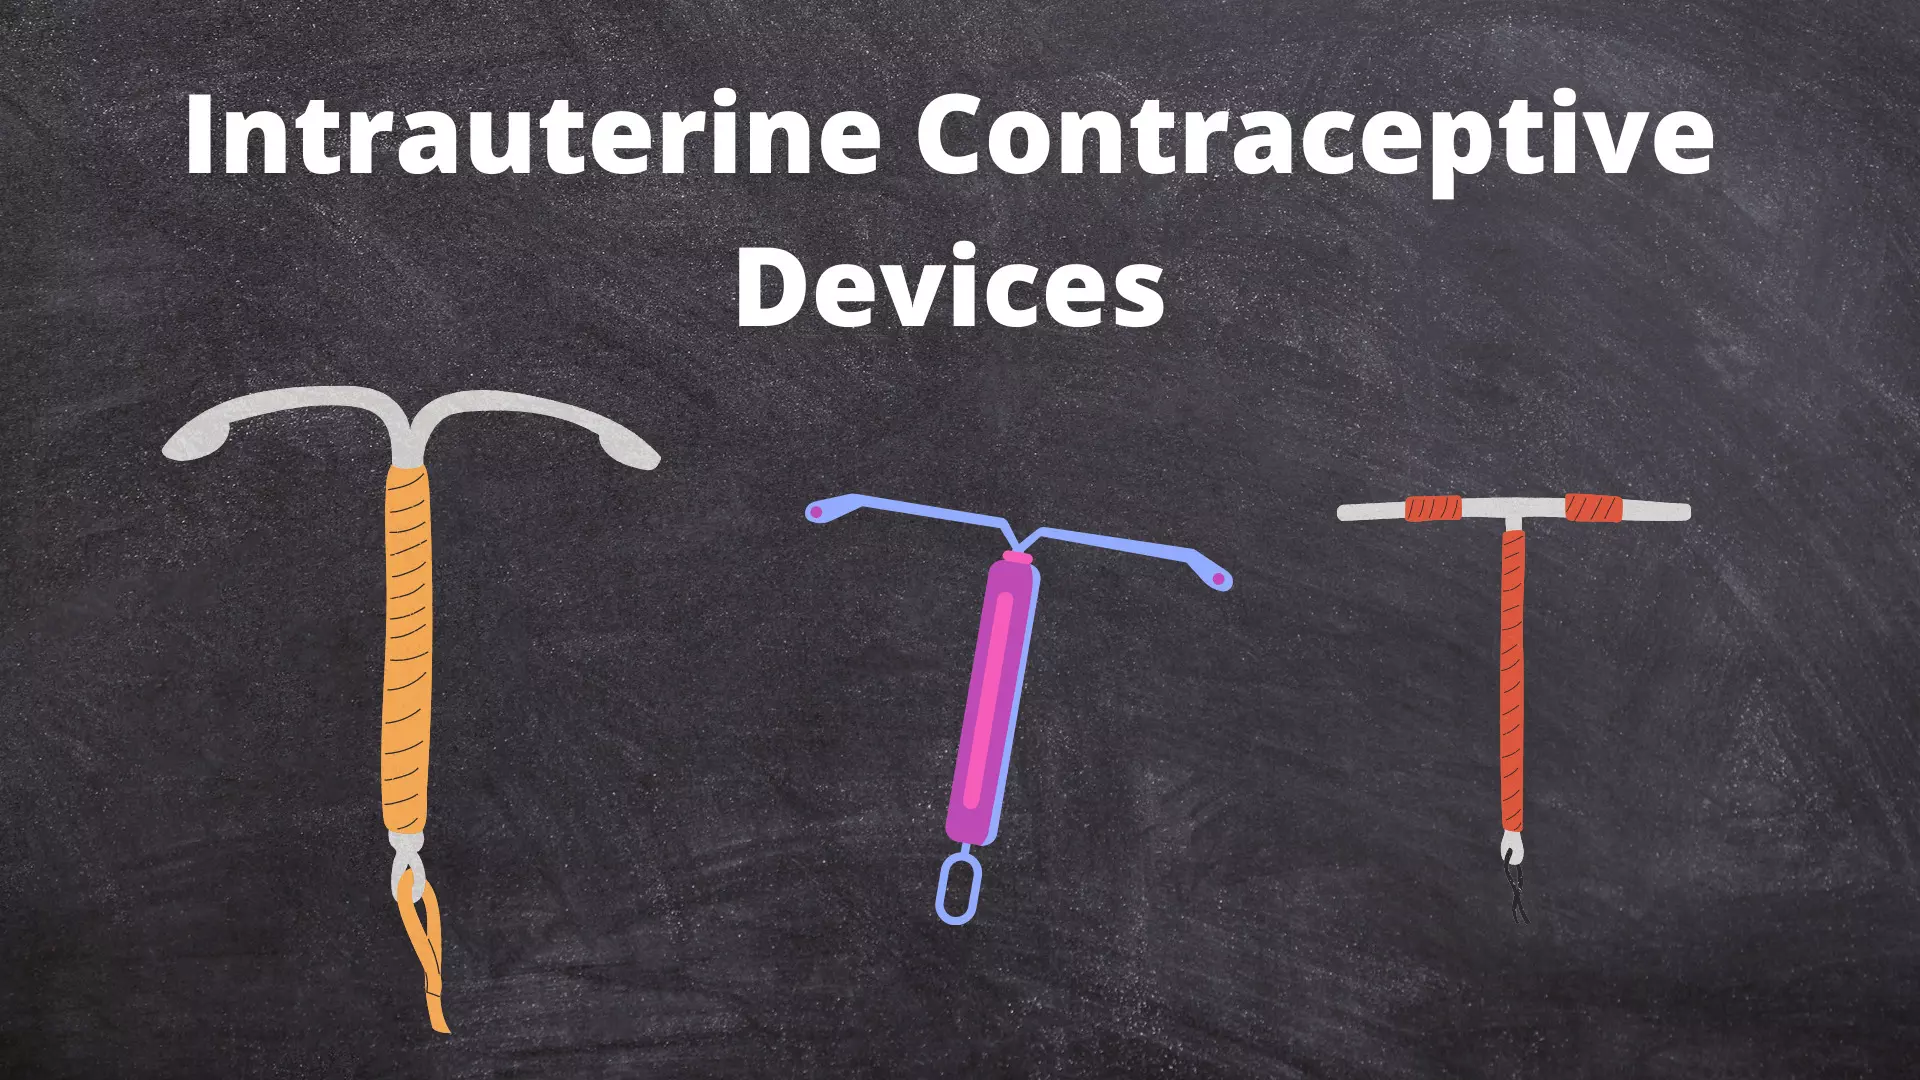 Intrauterine contraception tied to satisfaction, confidence and low switching intentions by users: Study